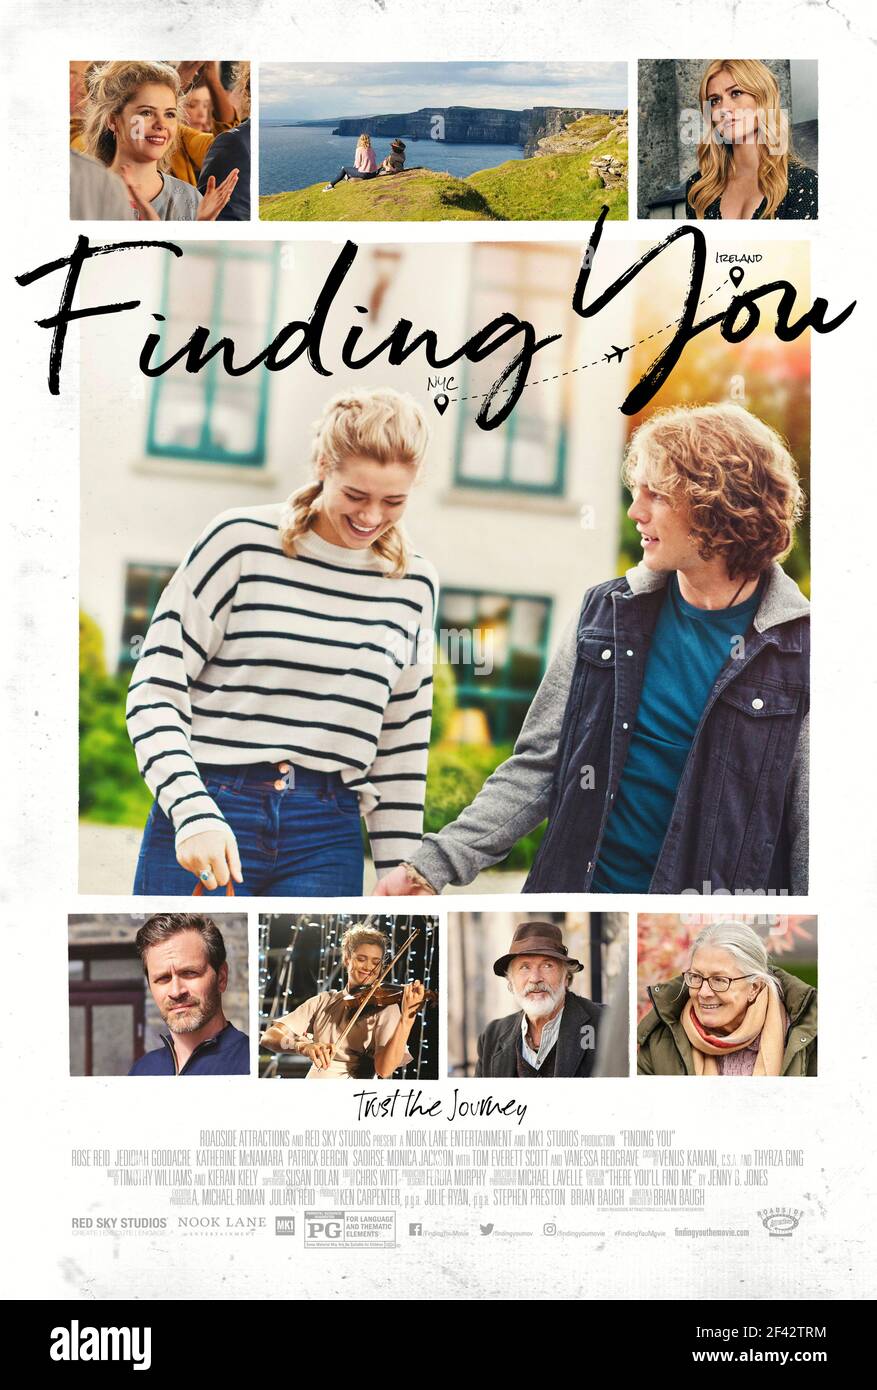 Finding You (2021) directed by Brian Baugh and starring Katherine McNamara, Vanessa Redgrave and Tom Everett Scott. Adaptation of Jenny B. Jones' novel 'There You'll Find Me' about an unlikely romance between a musician and movie star in rural Ireland. Stock Photo